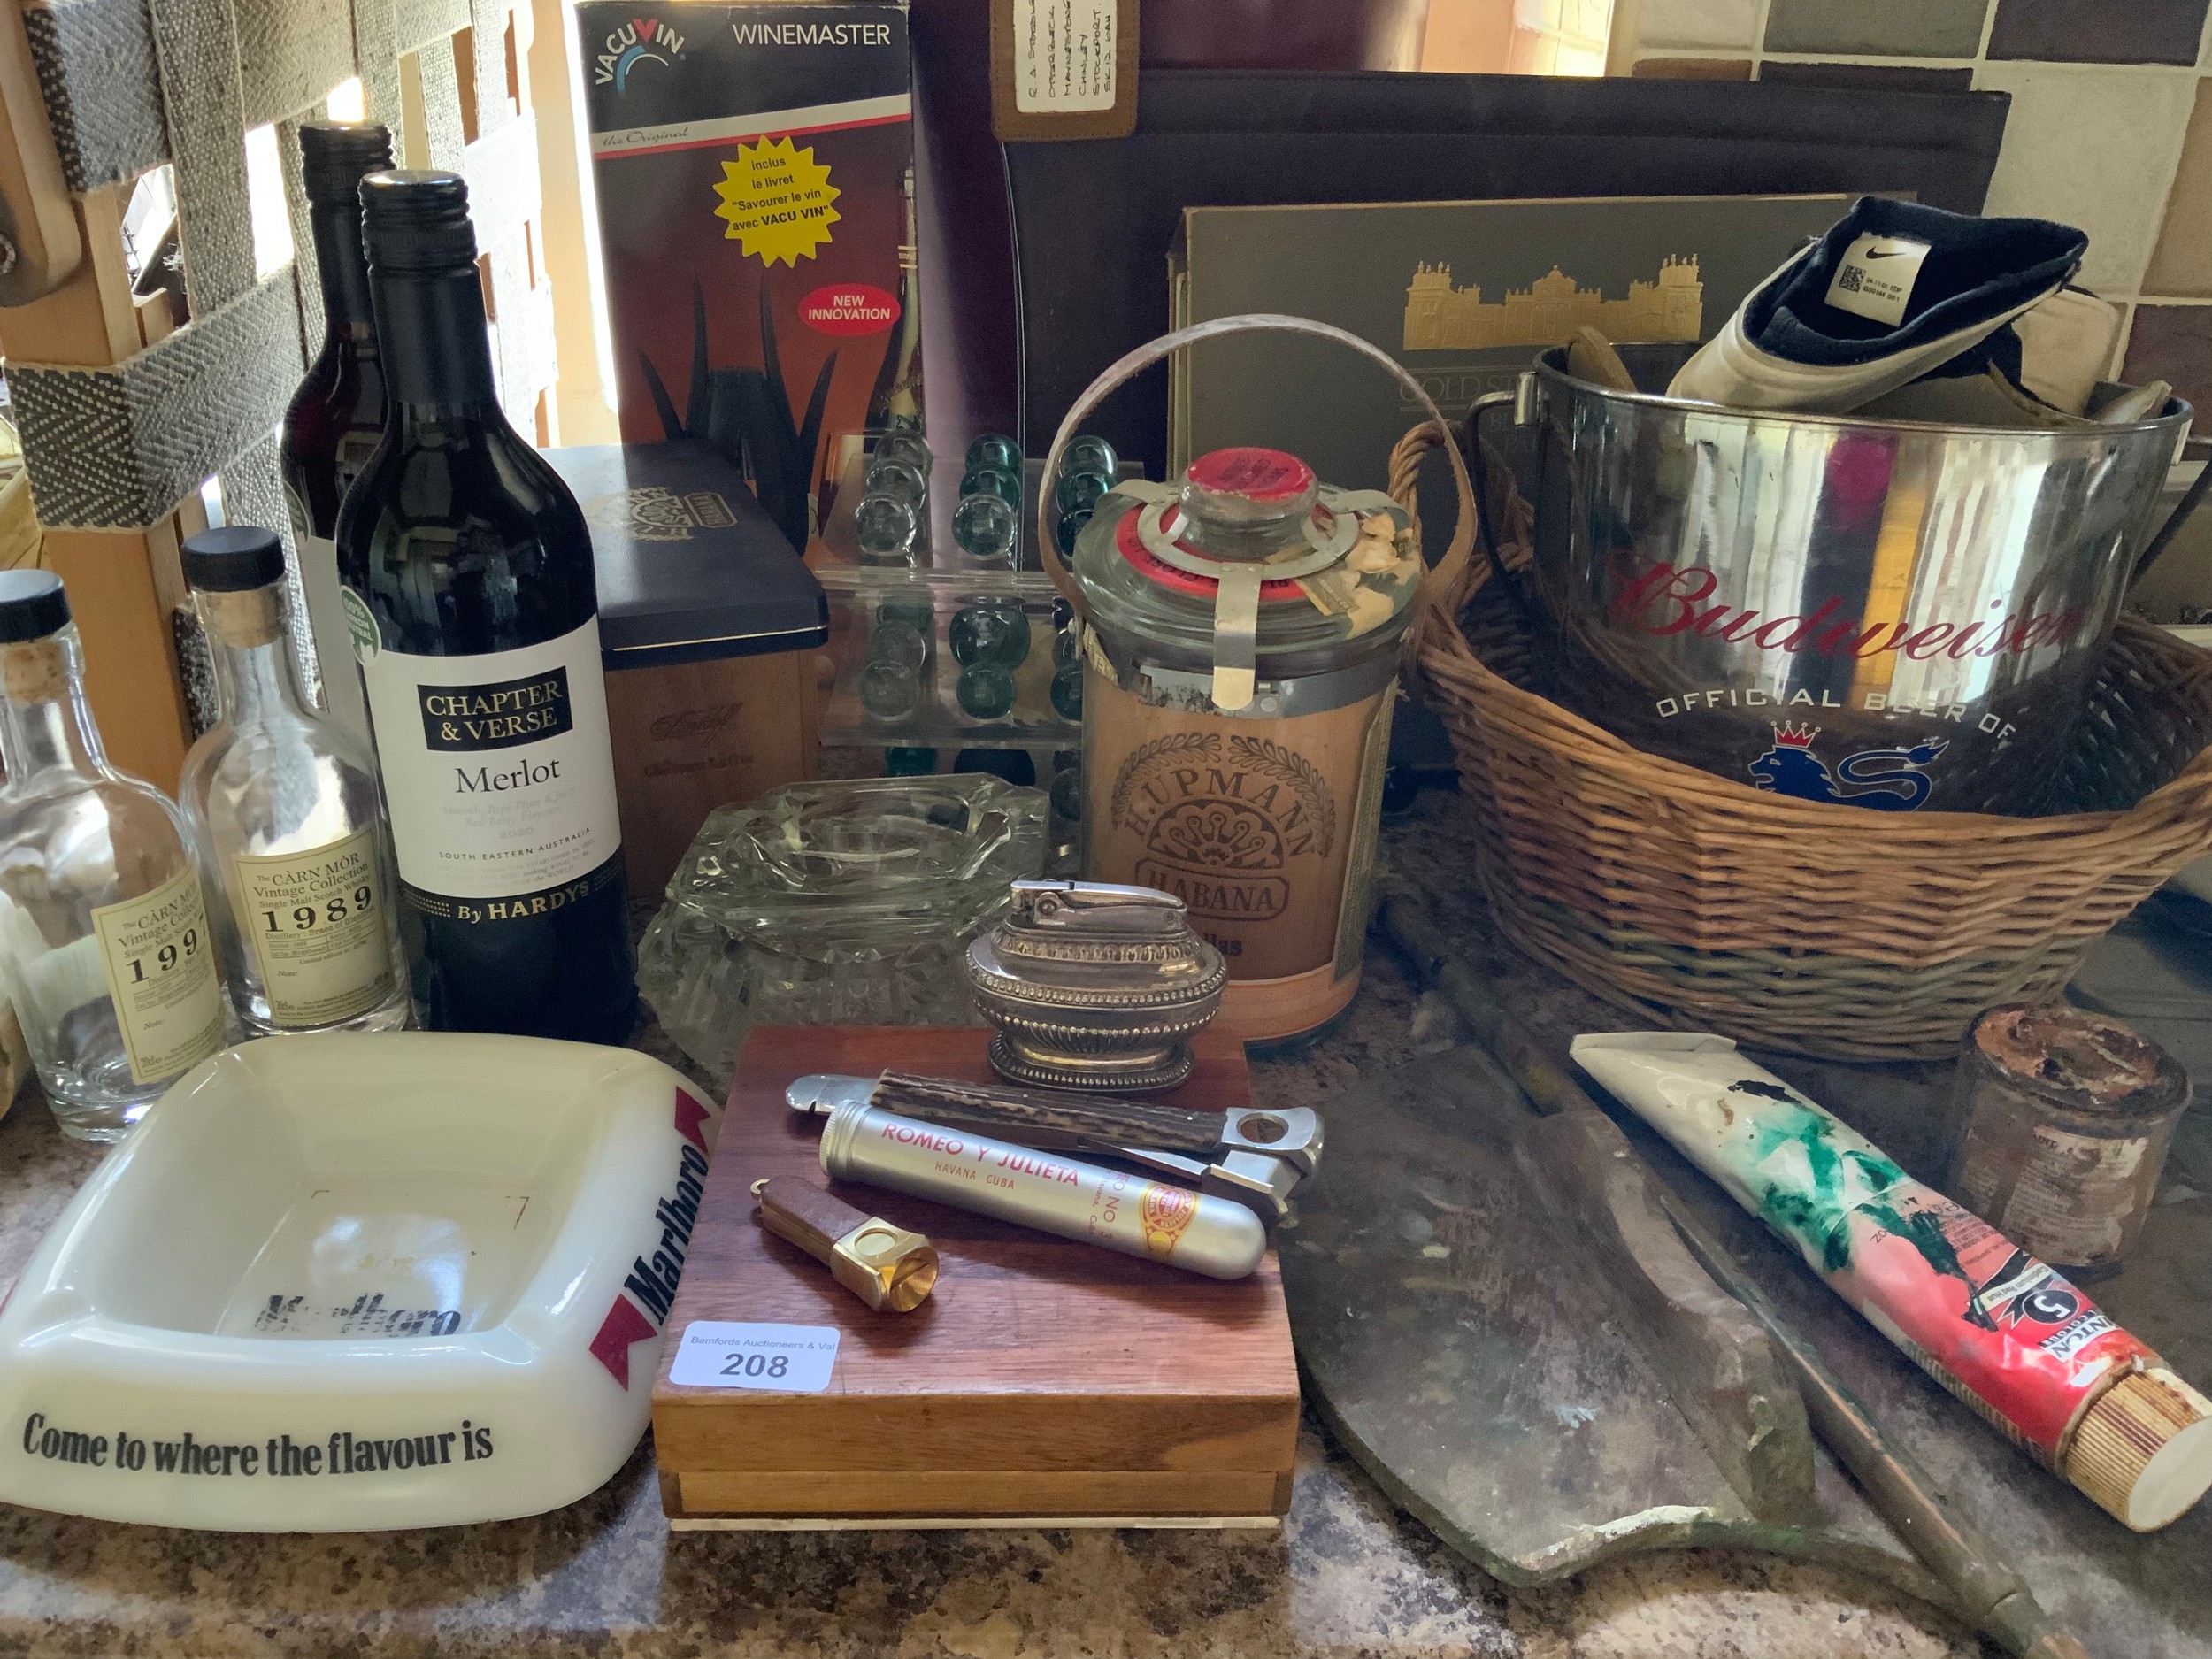 An Artist's easel; briefcases; wine master; cigars; Chapter & Verse Merlot; Budweiser ice bucket; - Image 2 of 2